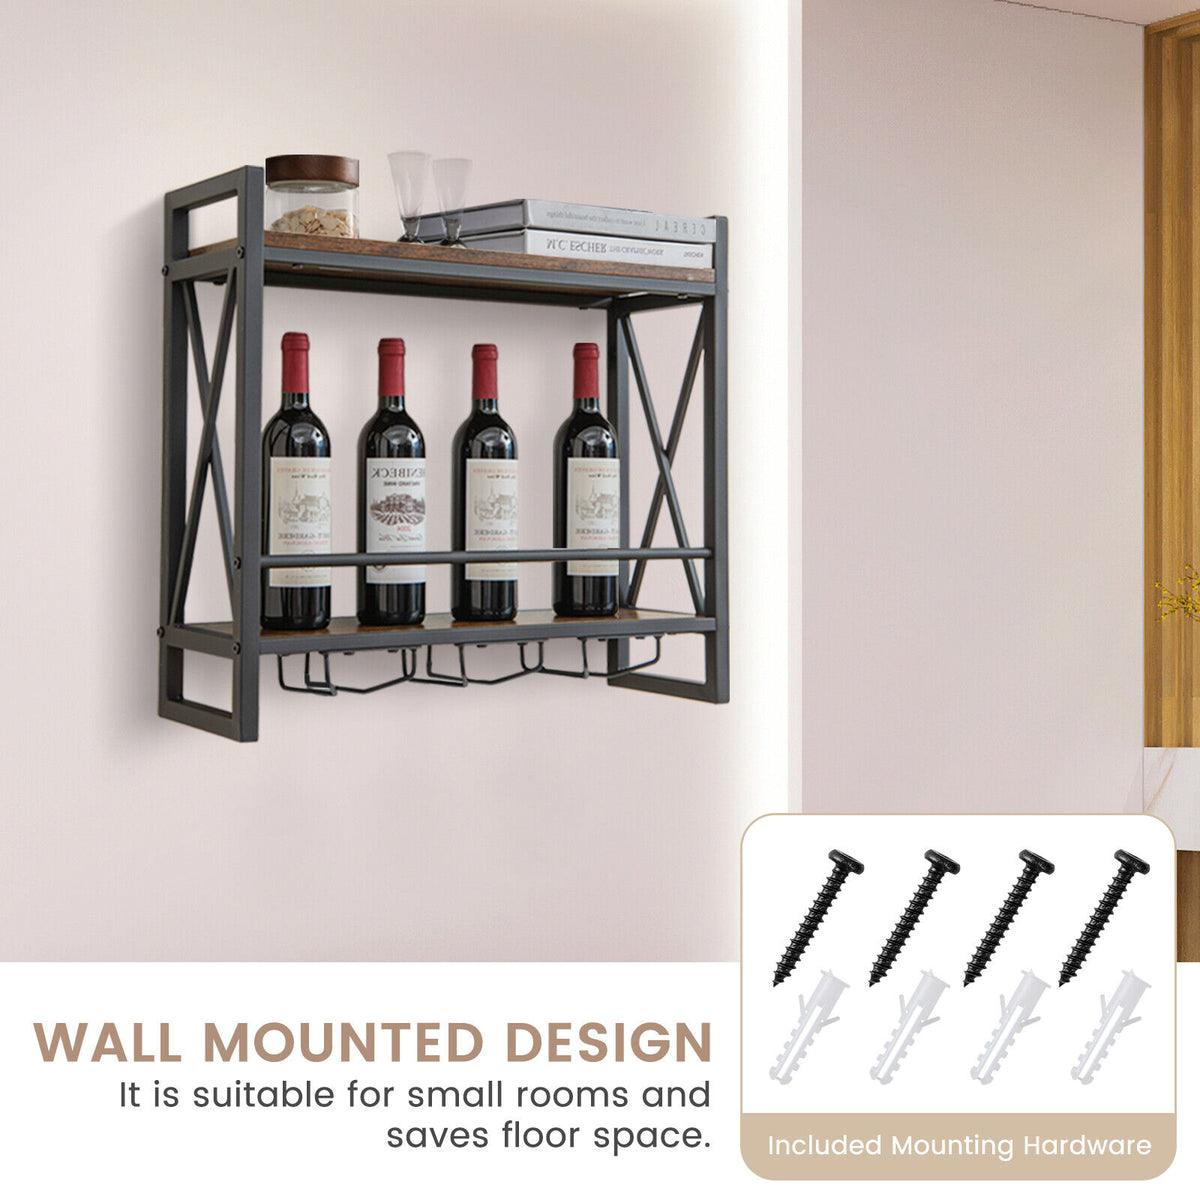 2-Tier Wall Mounted Wine Rack and Glass Holder Industrial Design